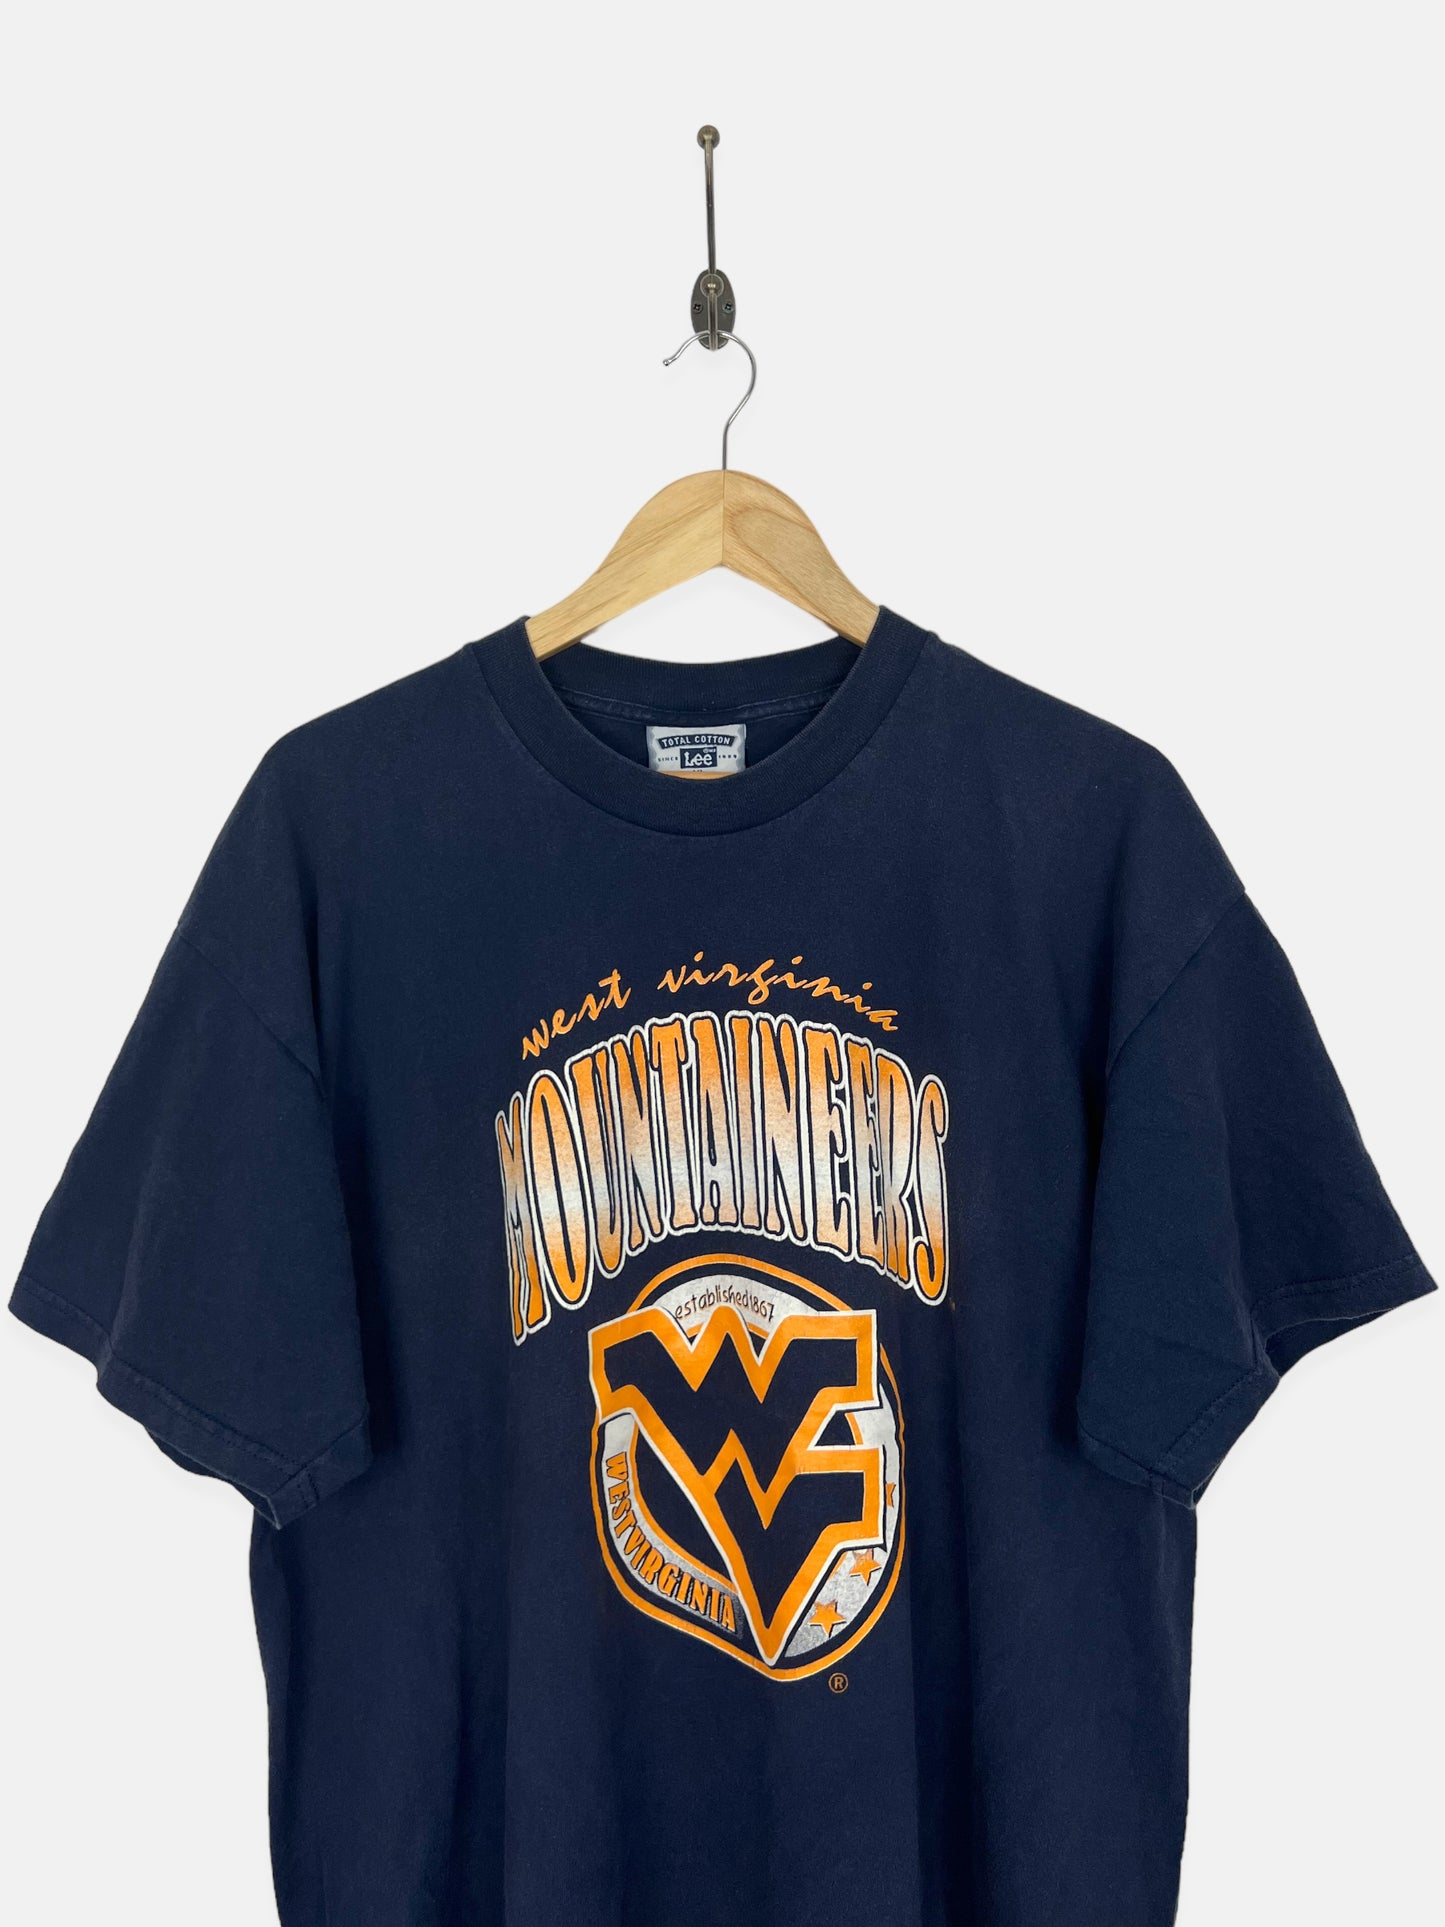 90's West Virginia Mountaineers Vintage T-Shirt Size L-XL